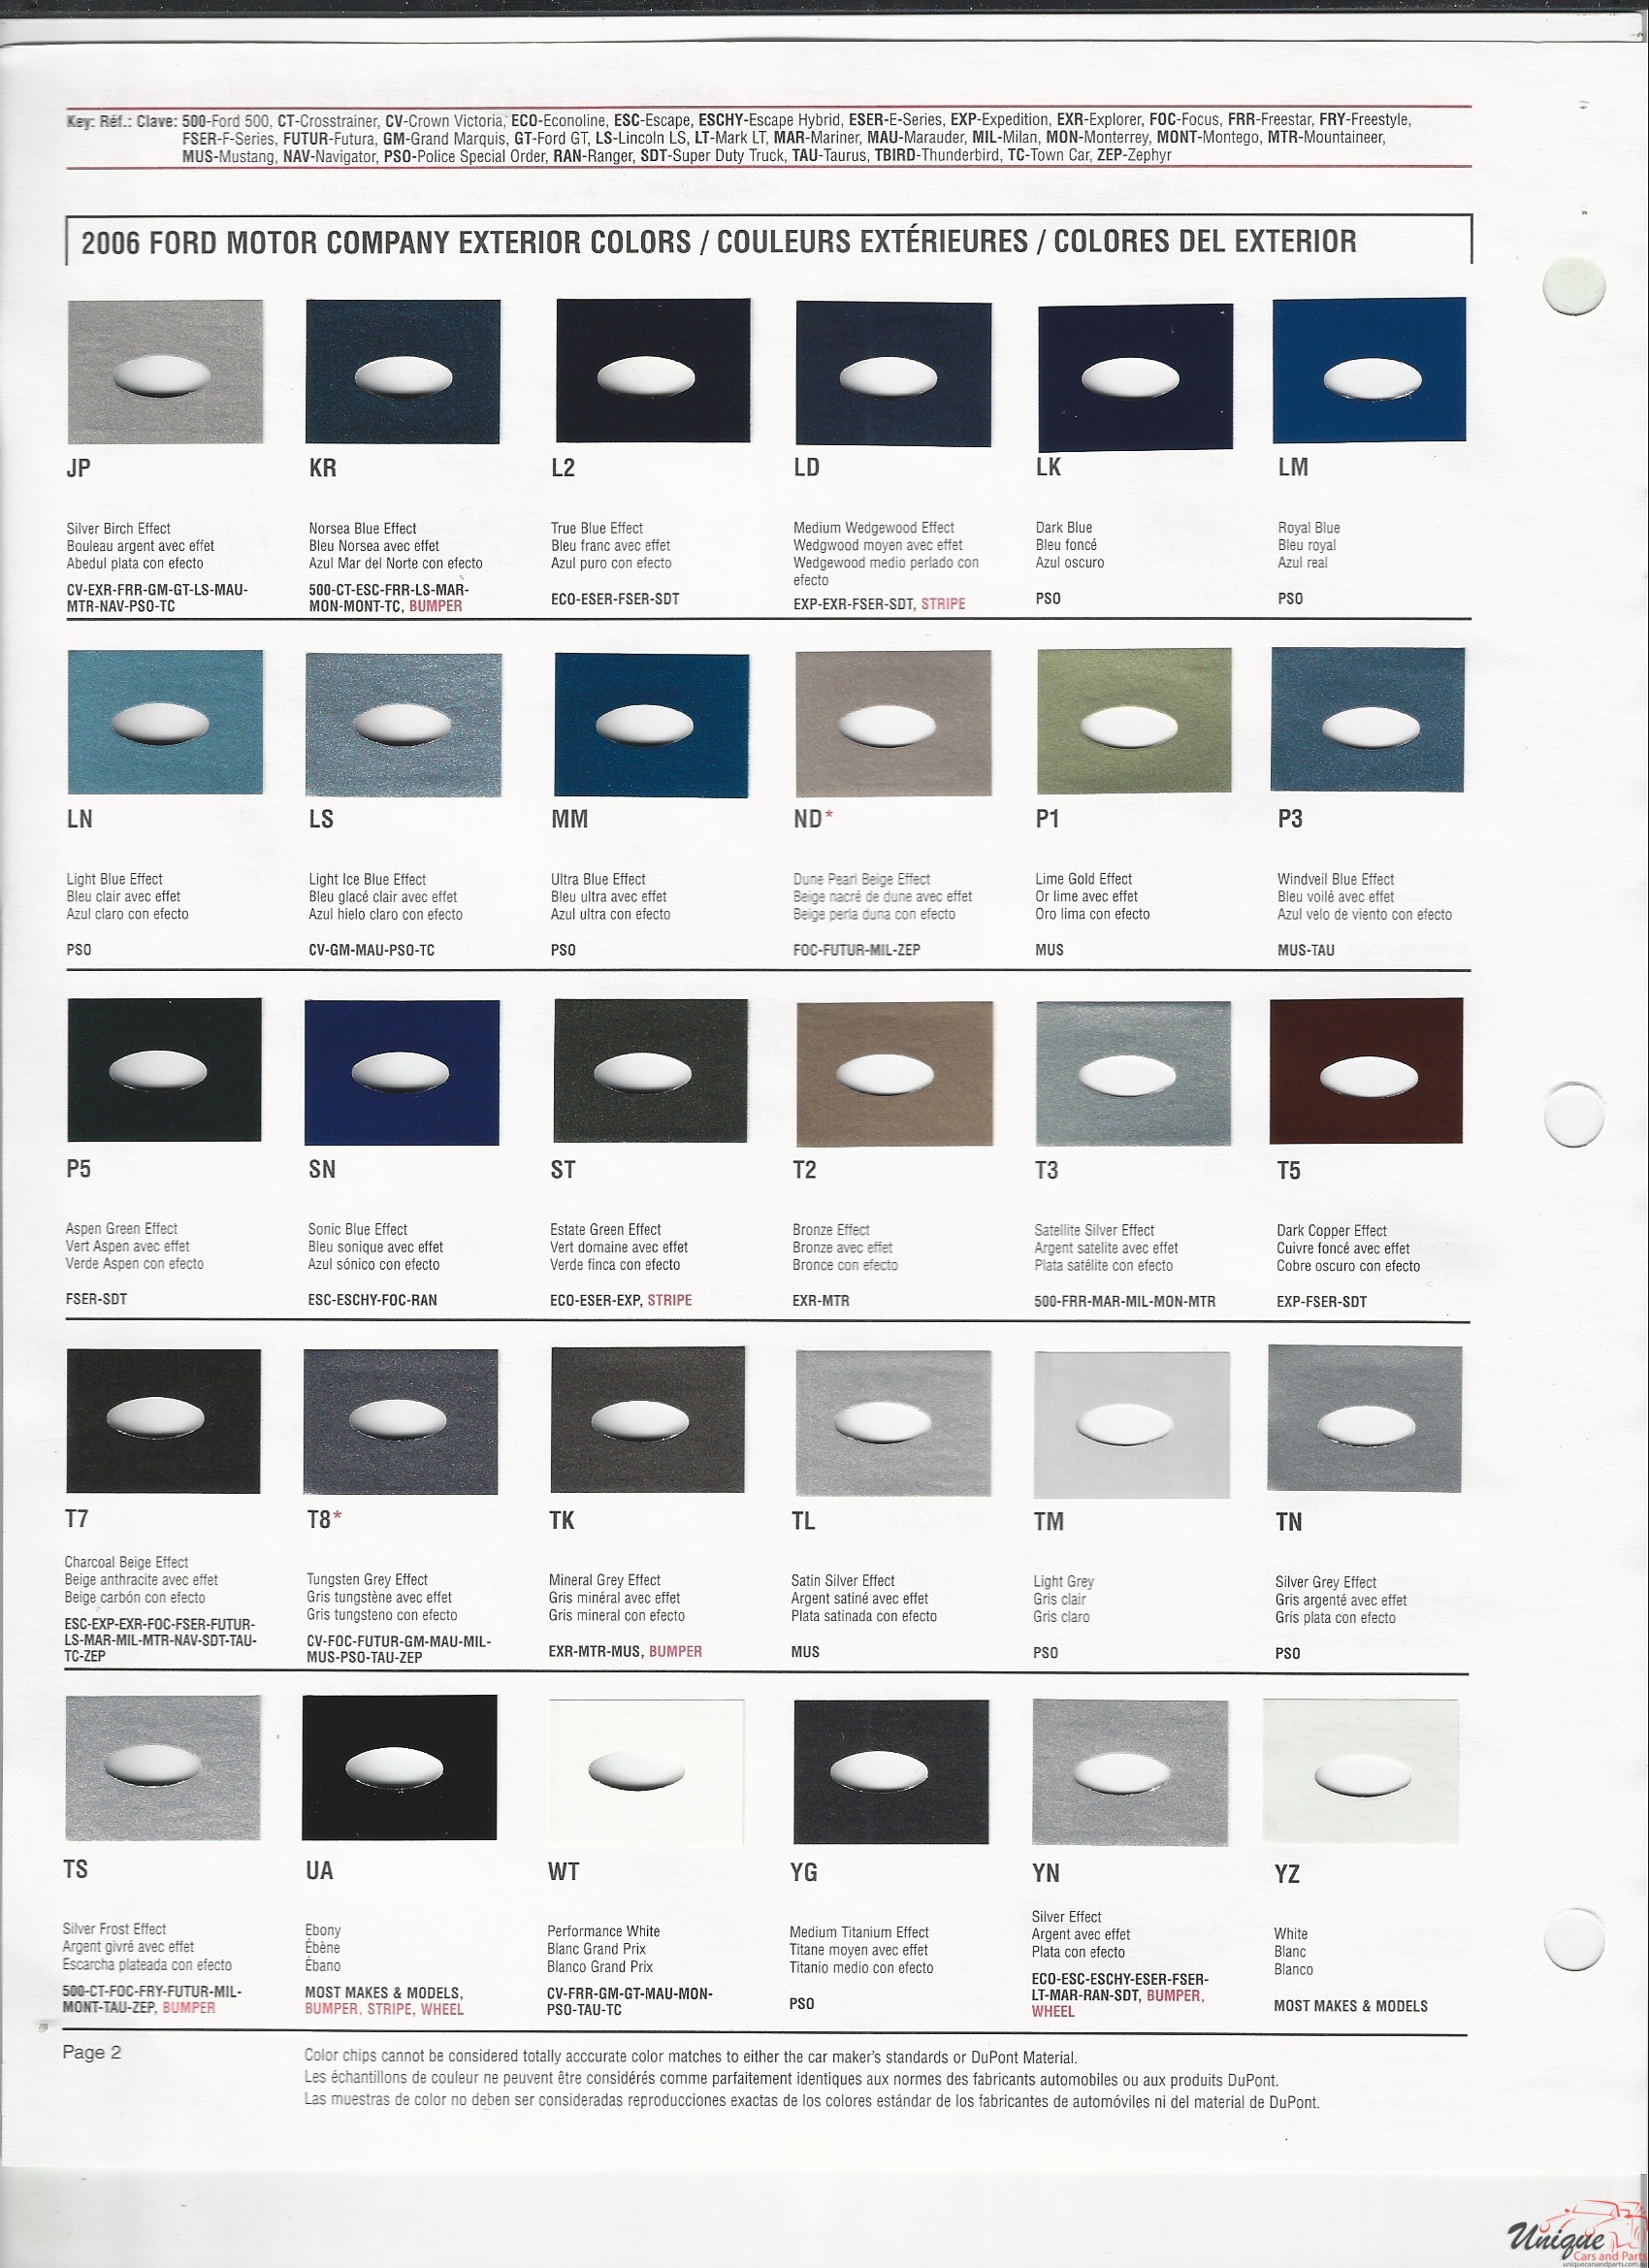 2006 Ford-1 Paint Charts